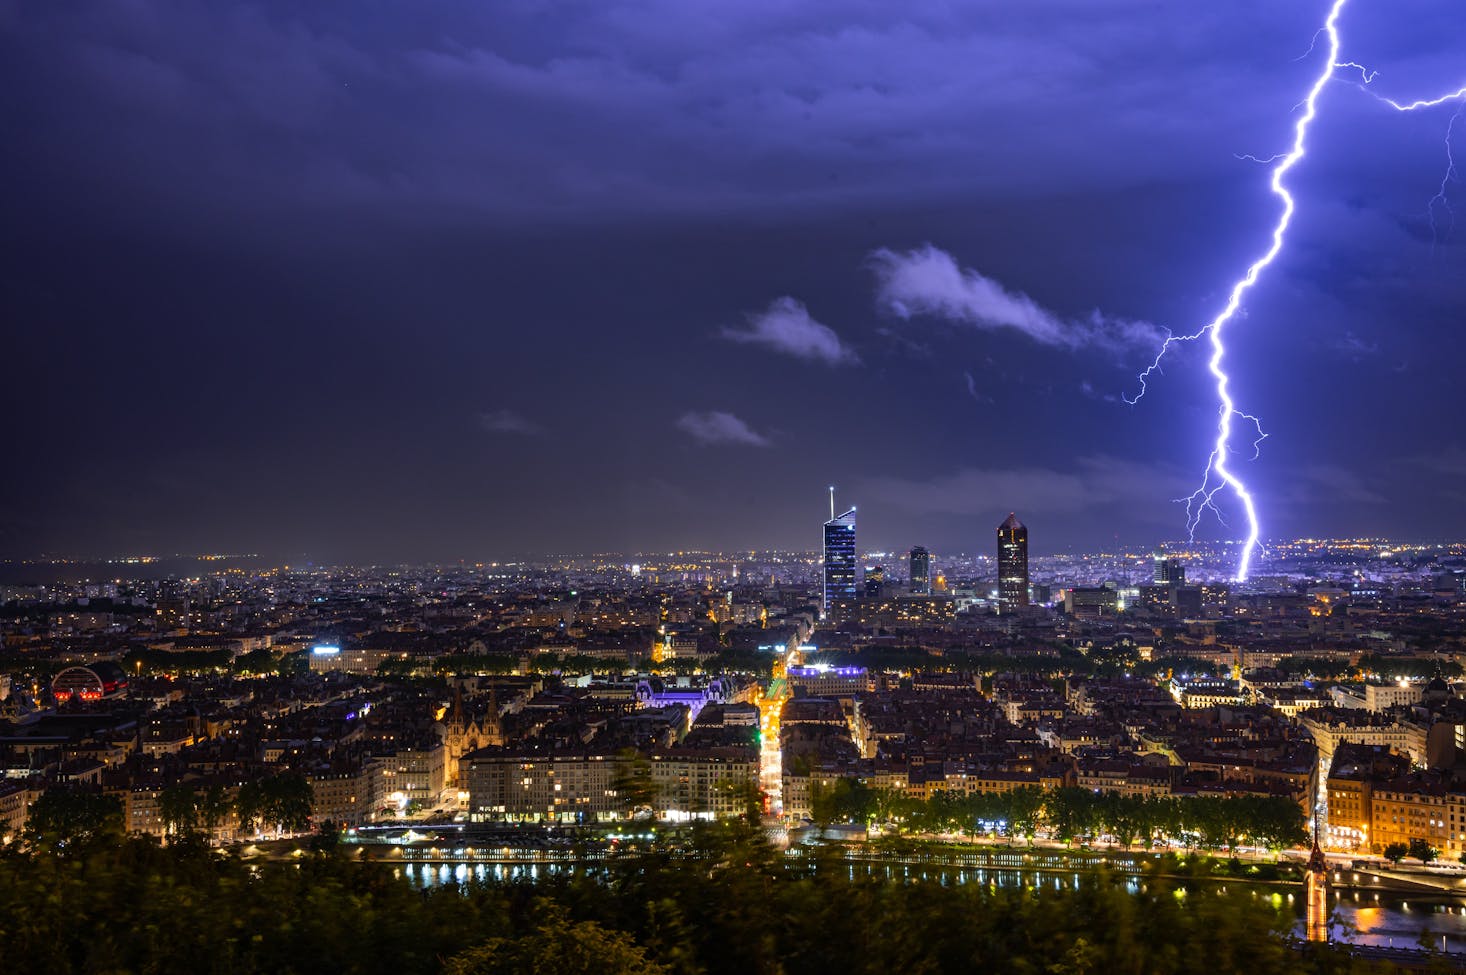 Evening storms in Lyon